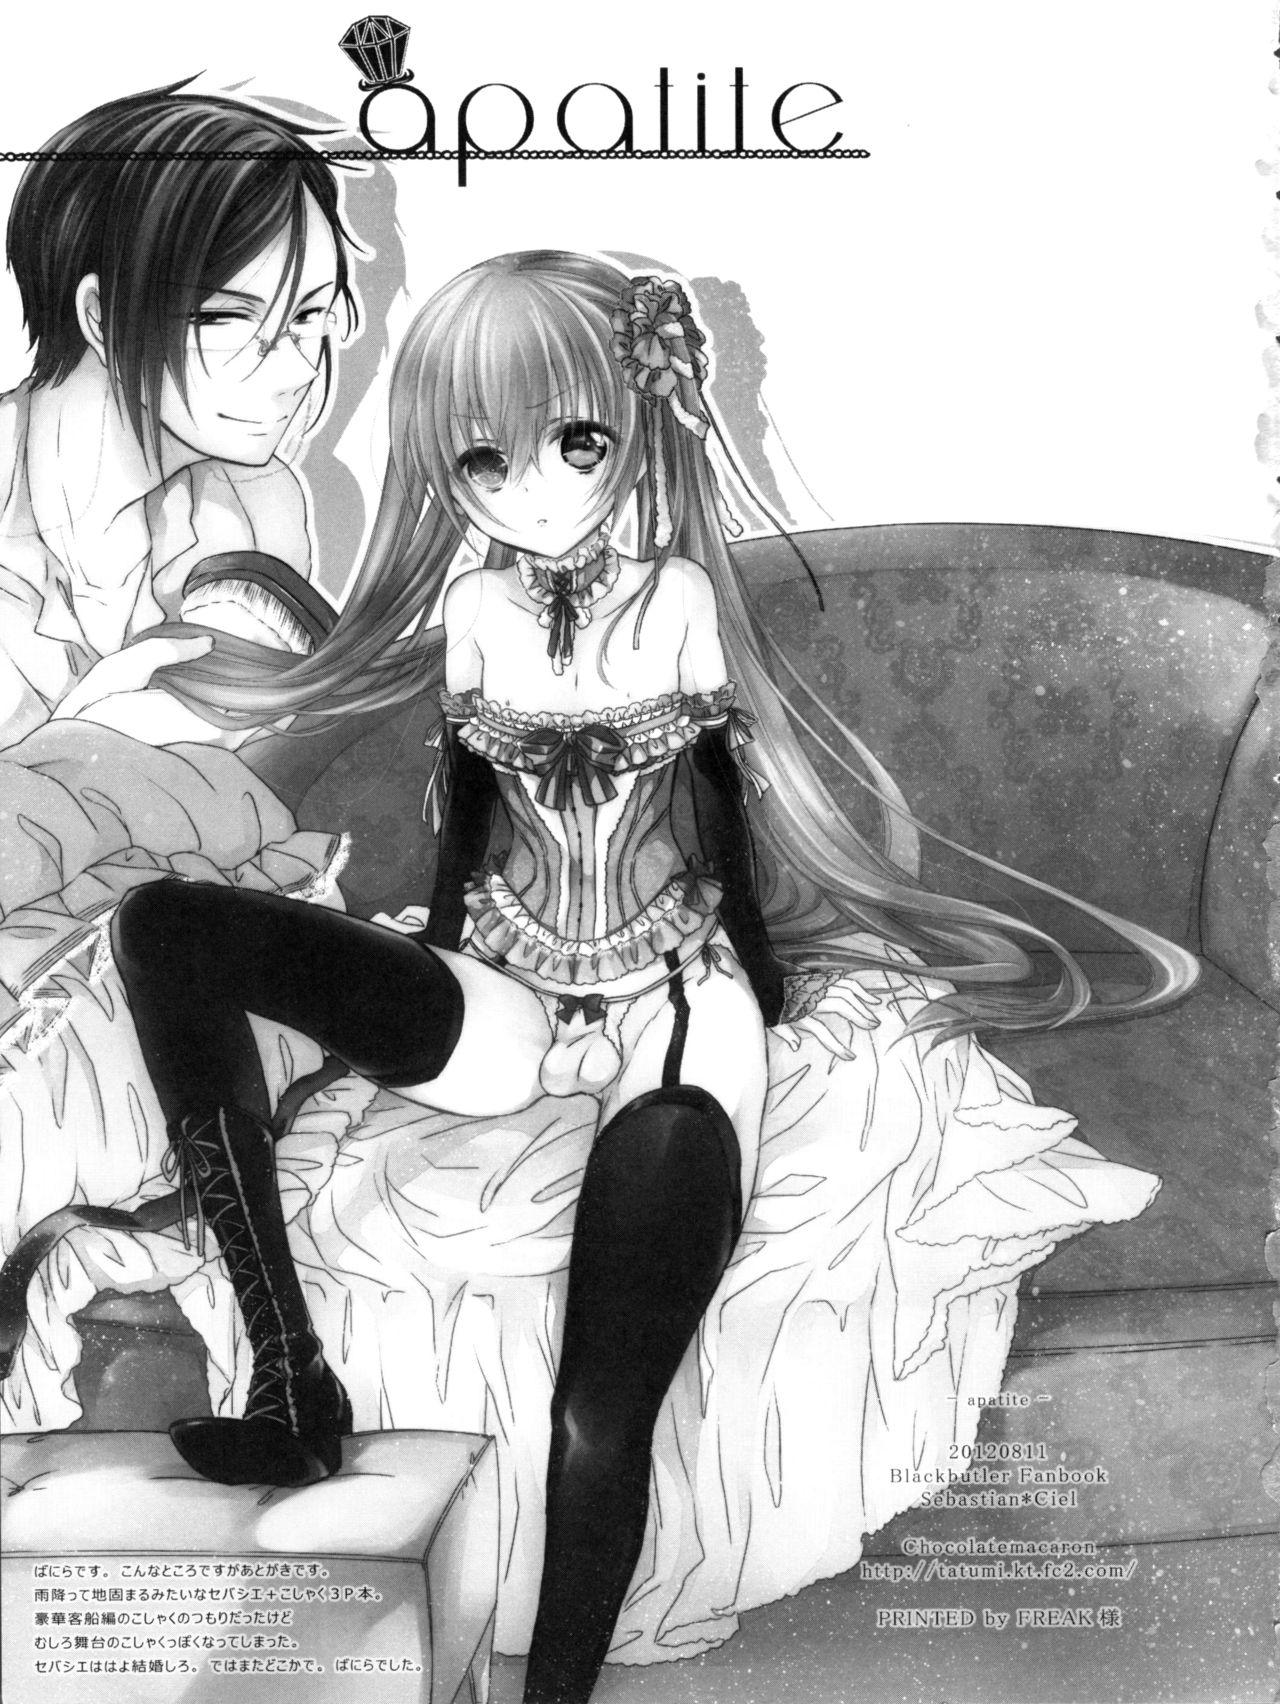 Uncensored Apatite - Black butler 18 Year Old Porn - Page 2